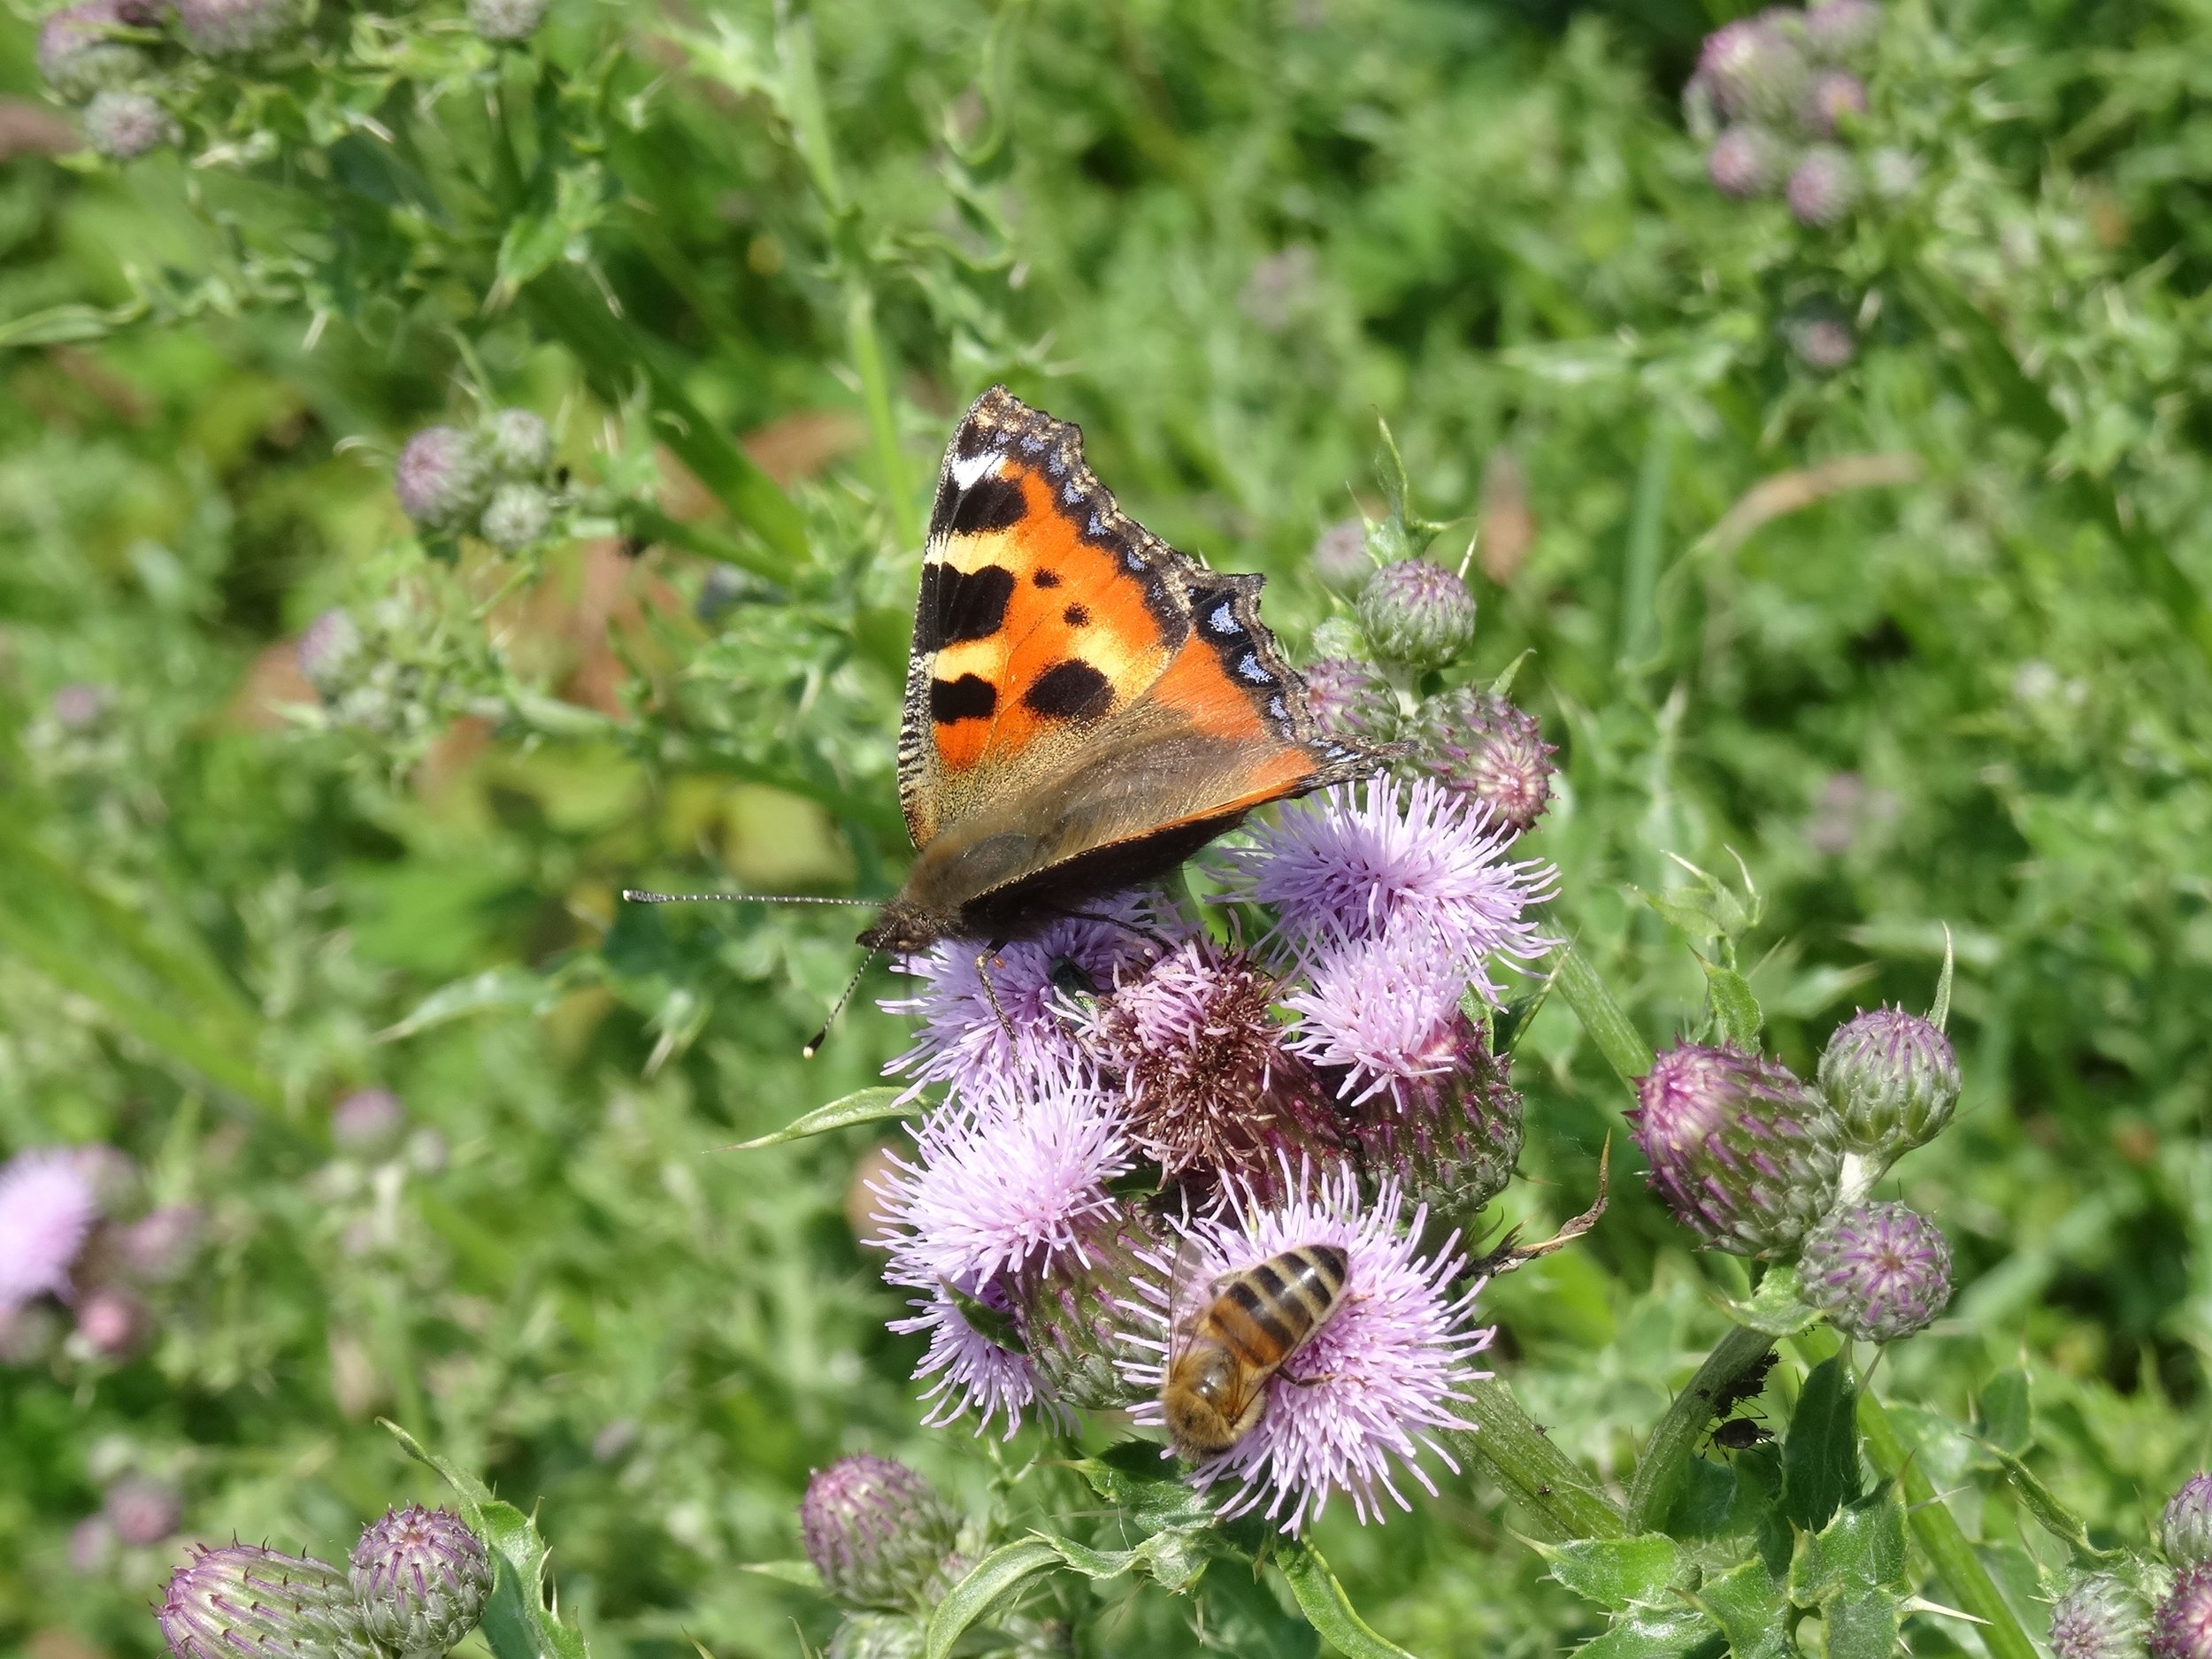  We were delighted to see the return of Tortoise shell butterflies to the meadow in summer 2021. 